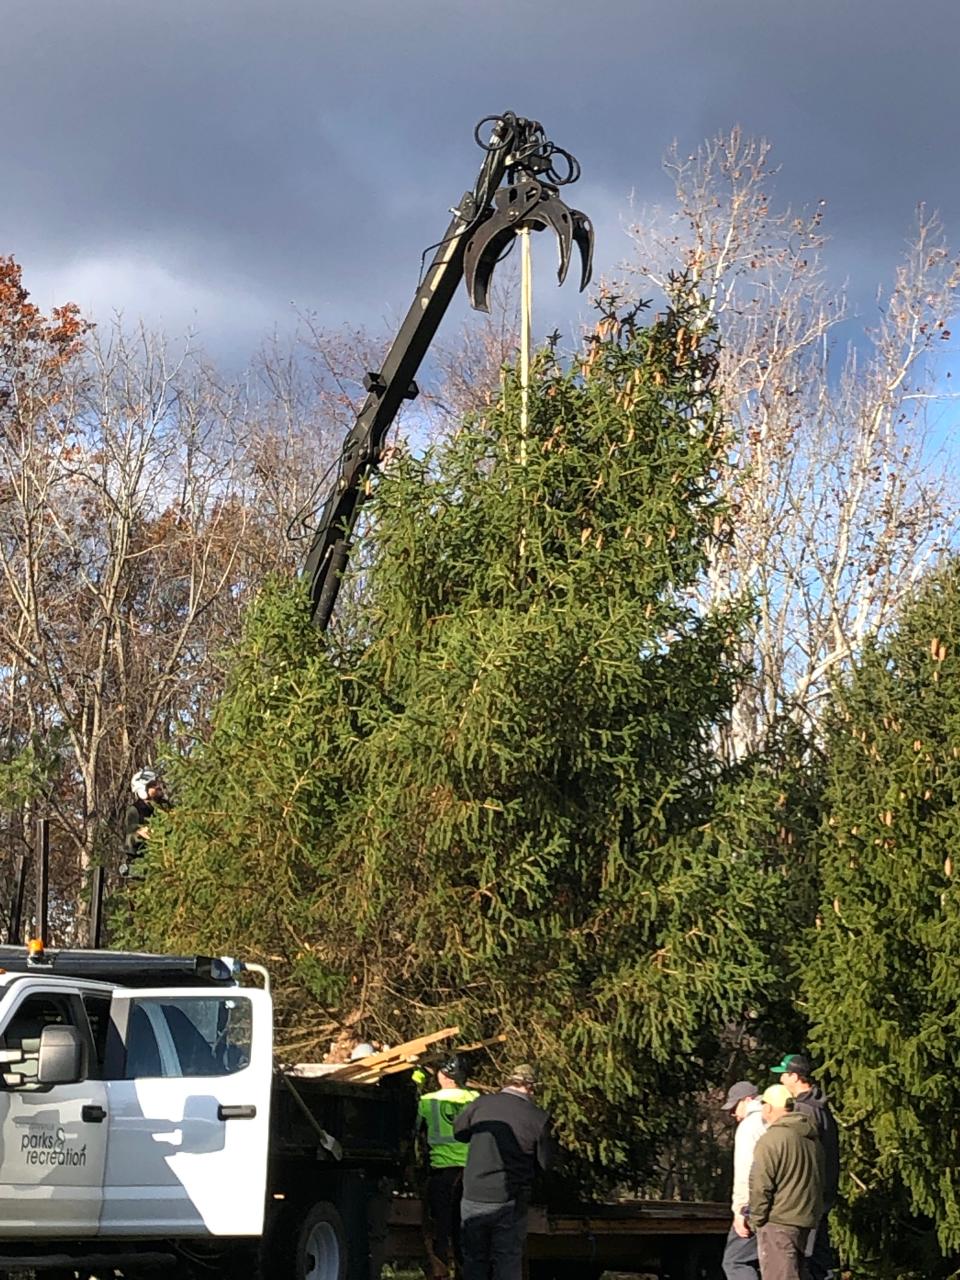 The  Norway Spruce tree was picked this year to be displayed at Charlottesville's Grand Illumination.